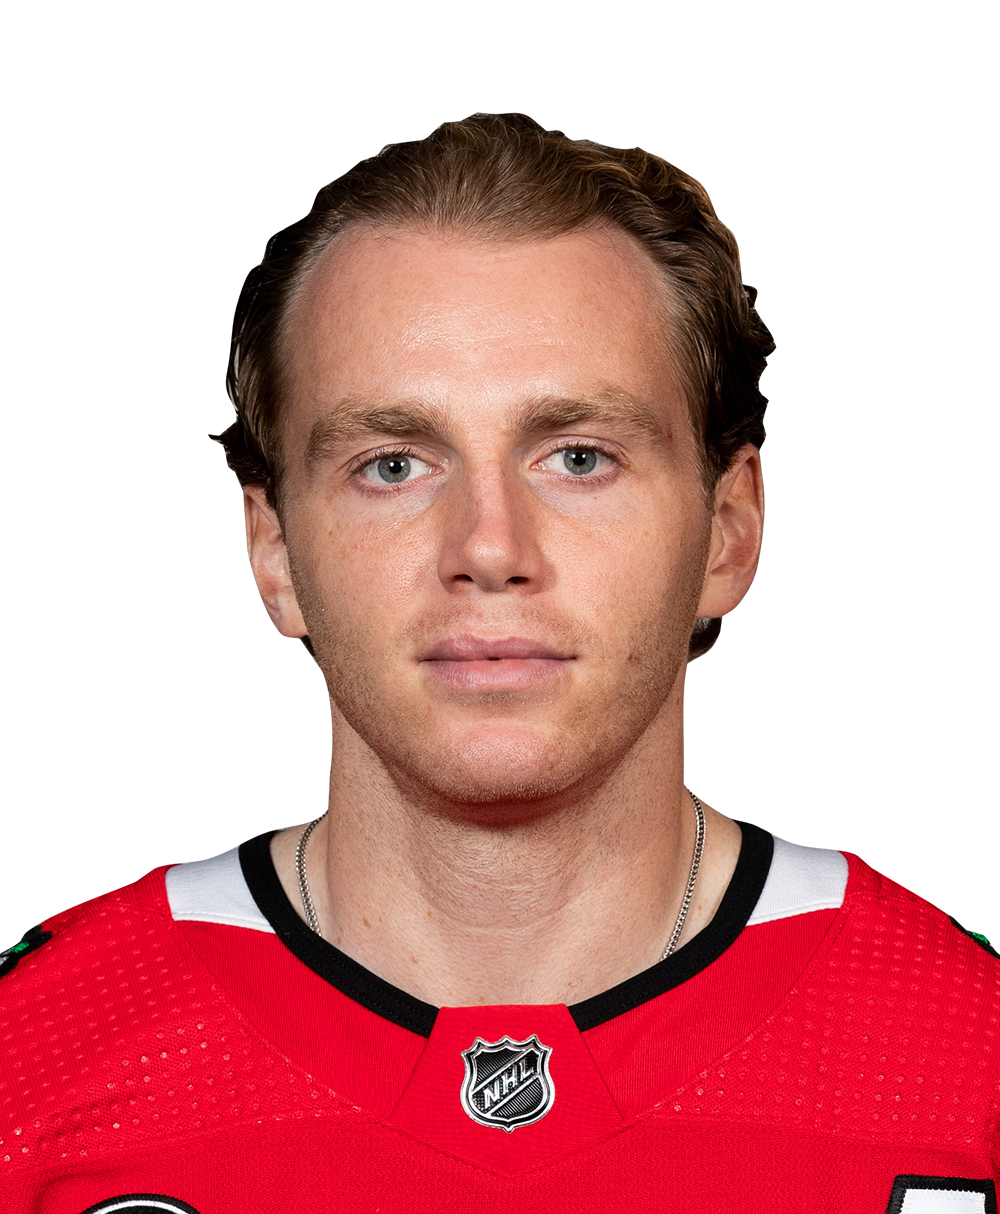 Patrick Kane shown working out in video while recovering from